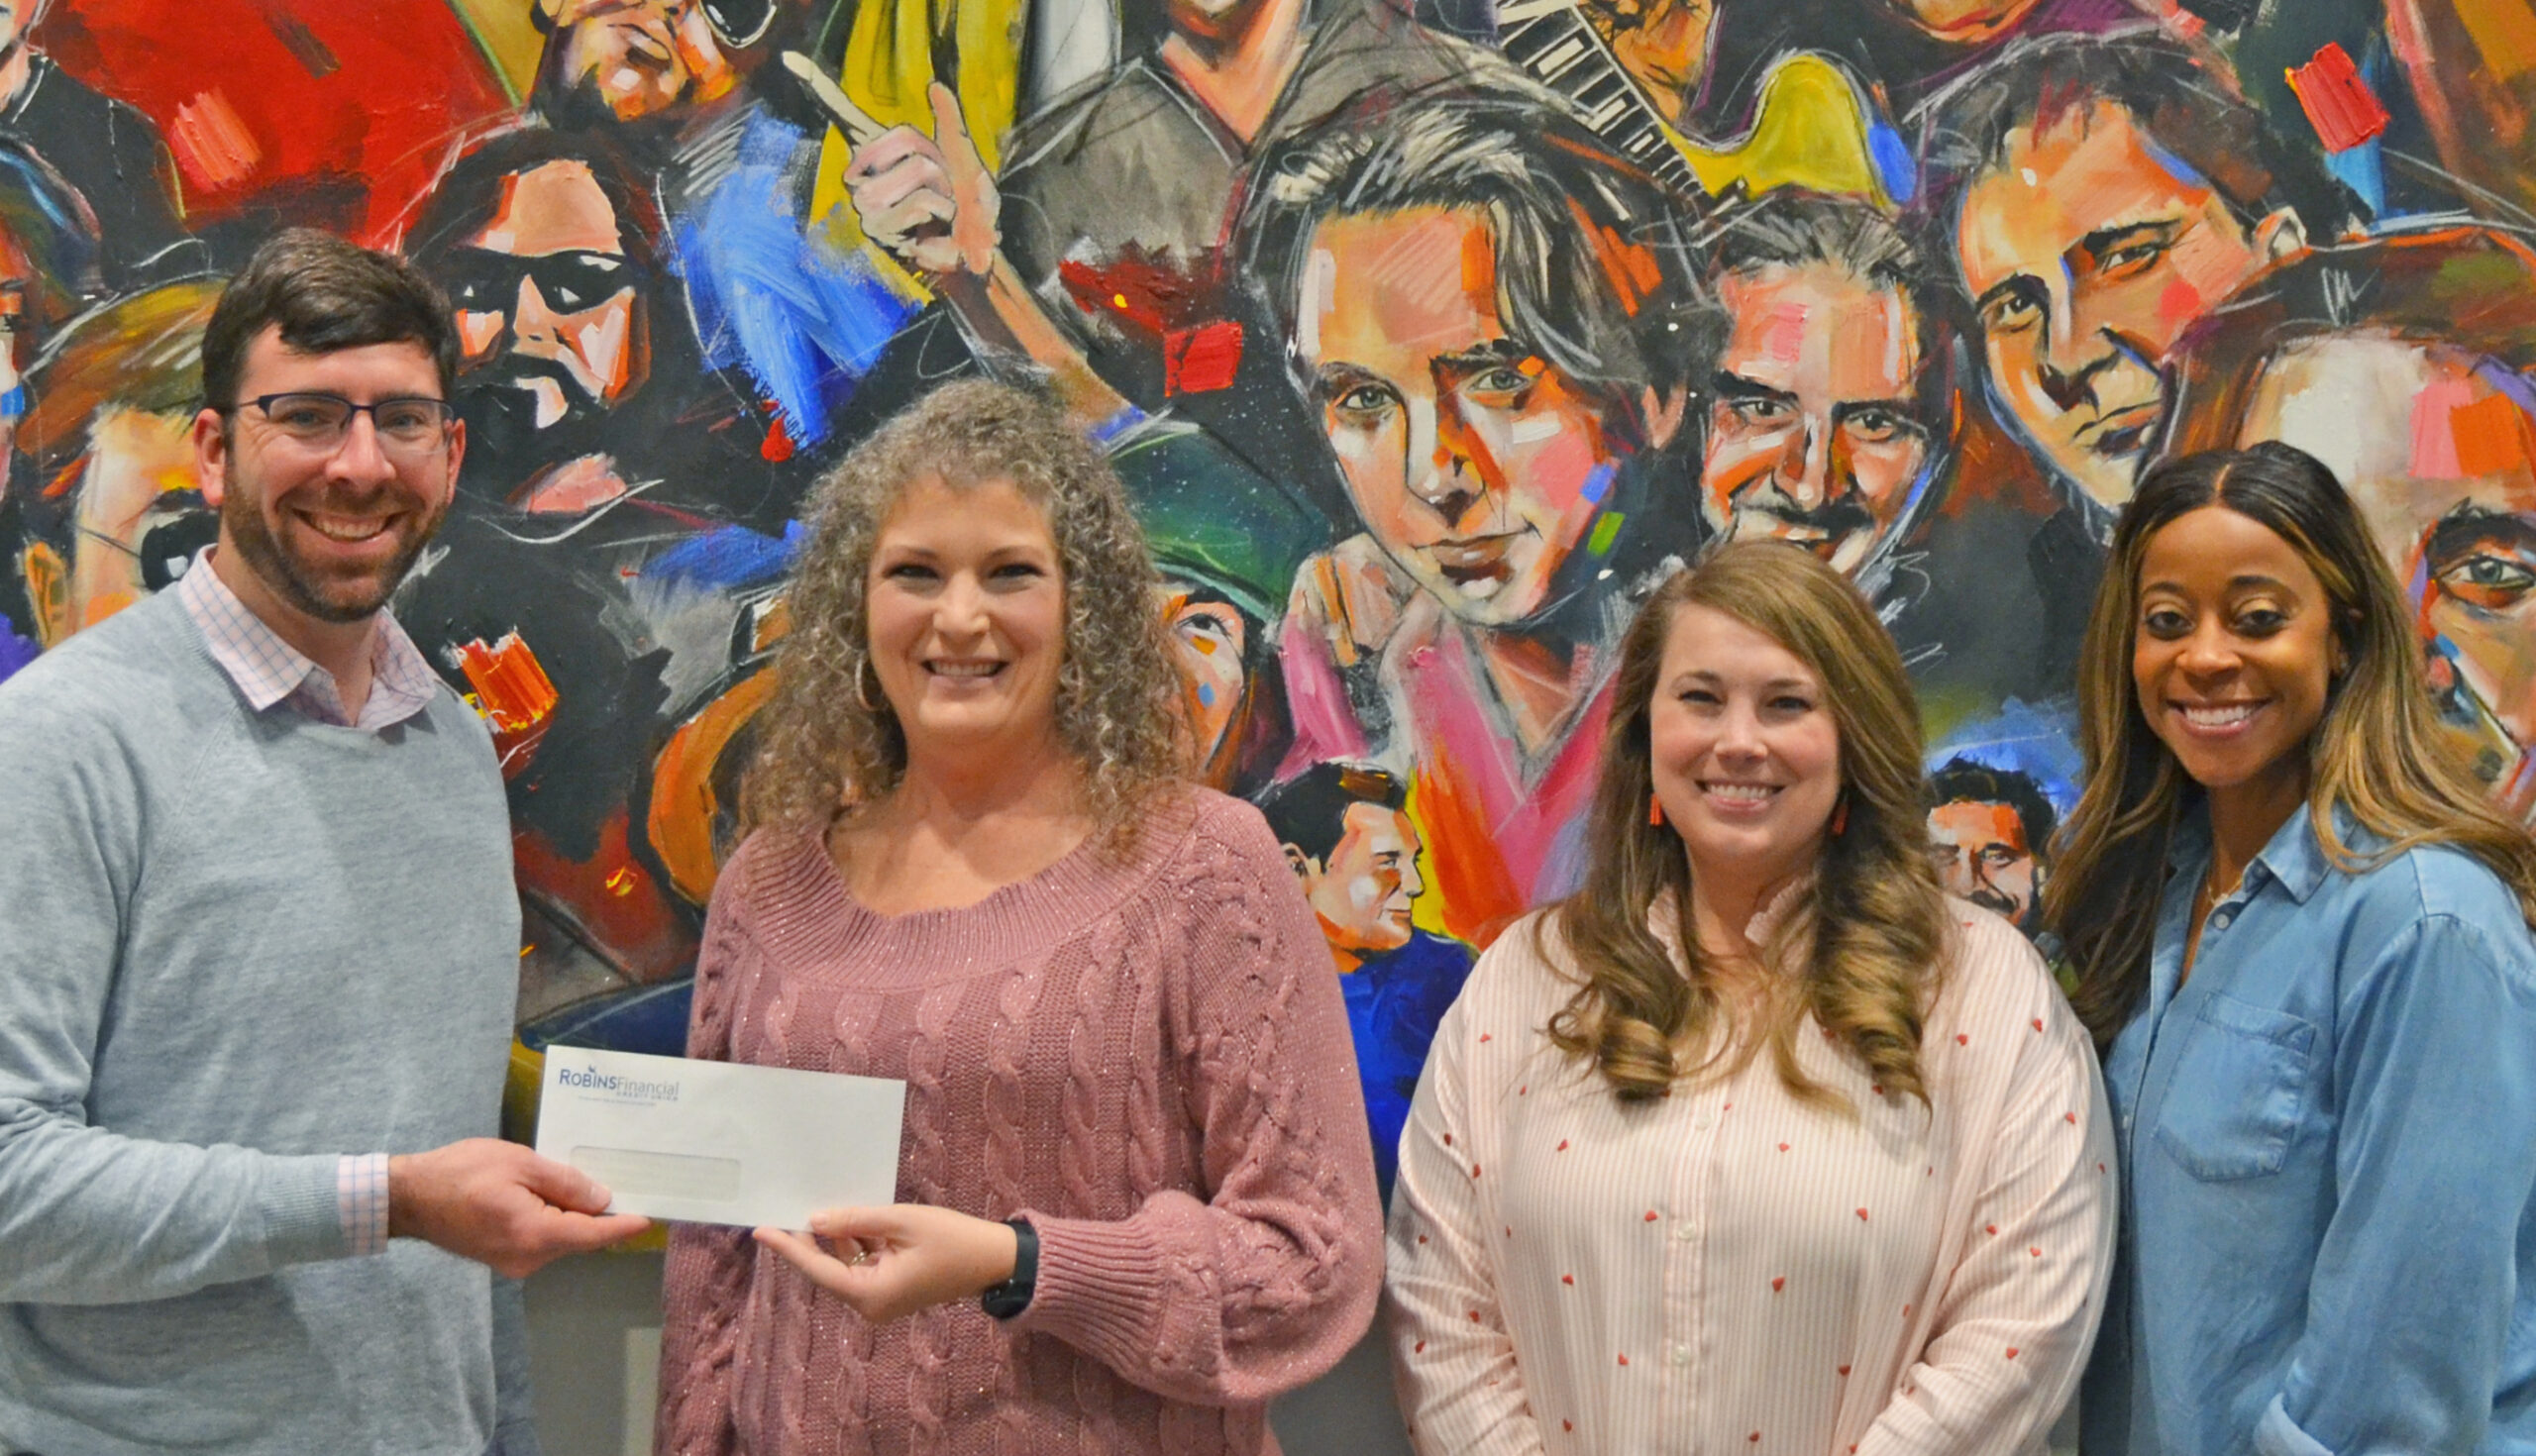 Robins Financial Credit Union Continues Sponsorship of Macon’s First Friday